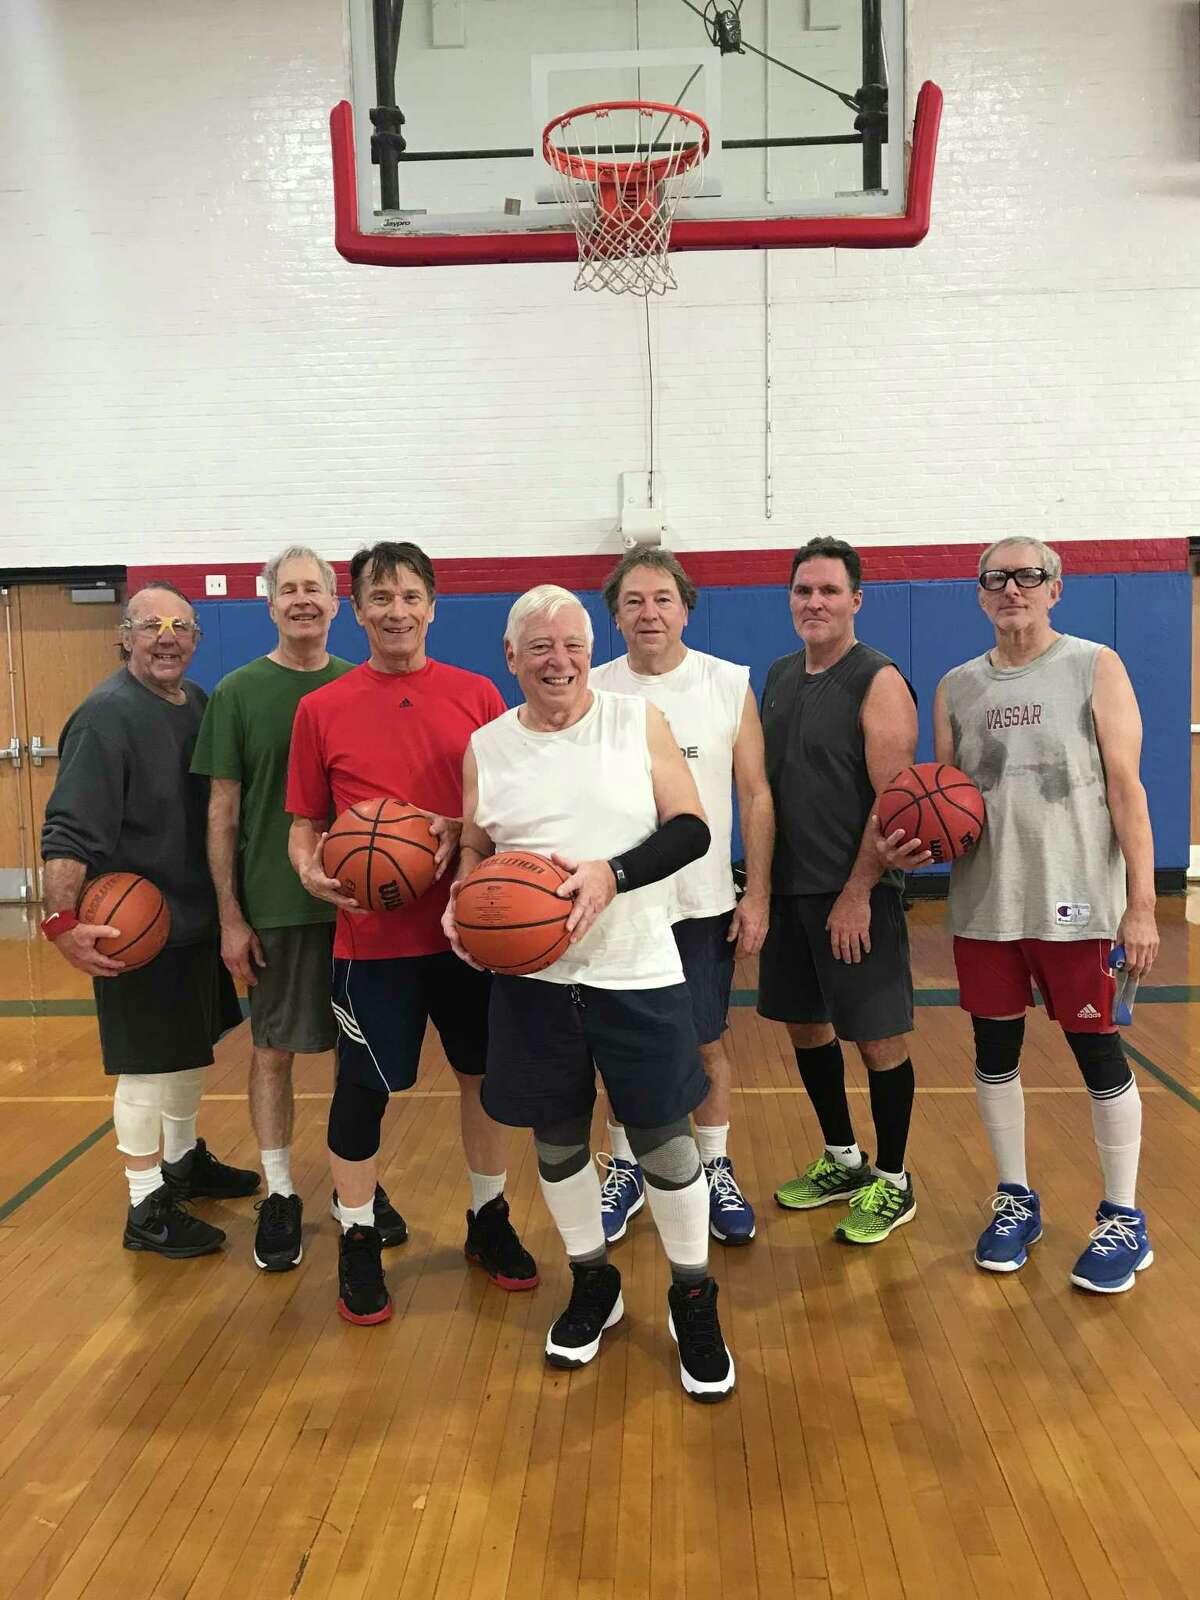 The Geezers is a group of guys who have played basketball for over 20 years.